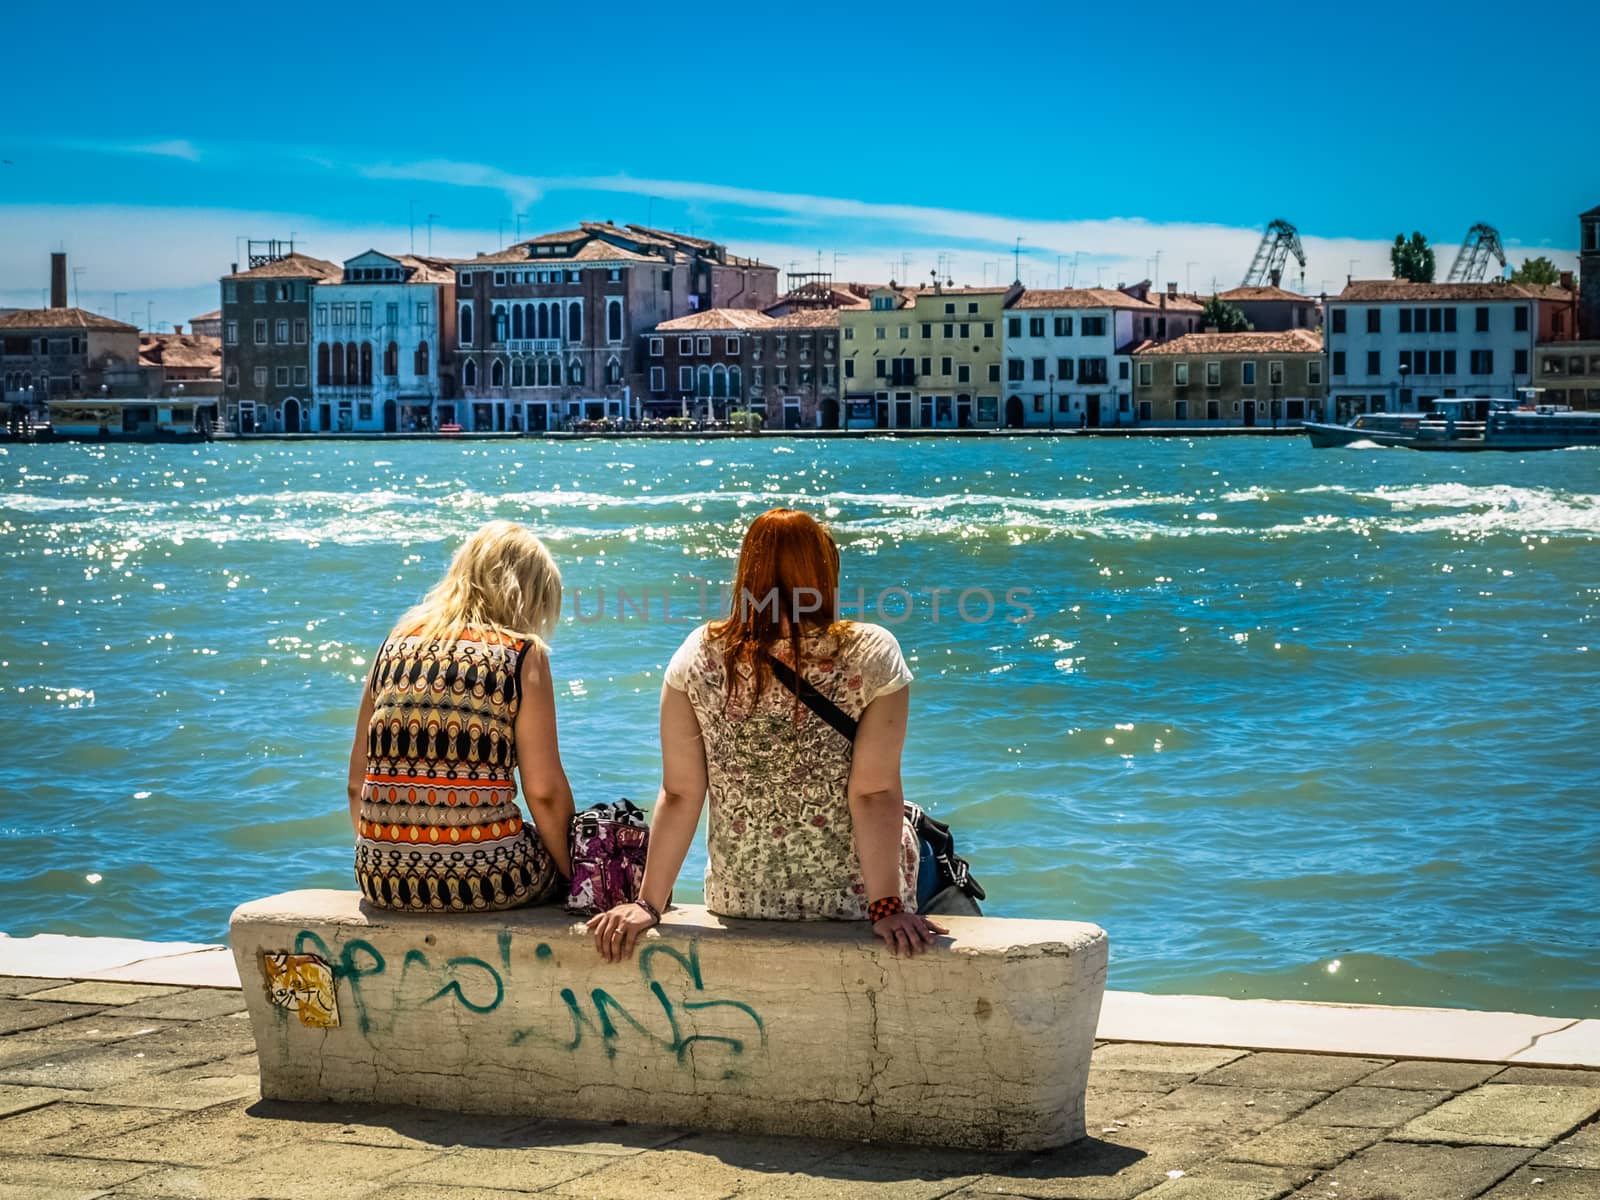 Two young girls sitting near the canal in Venice by kimbo-bo